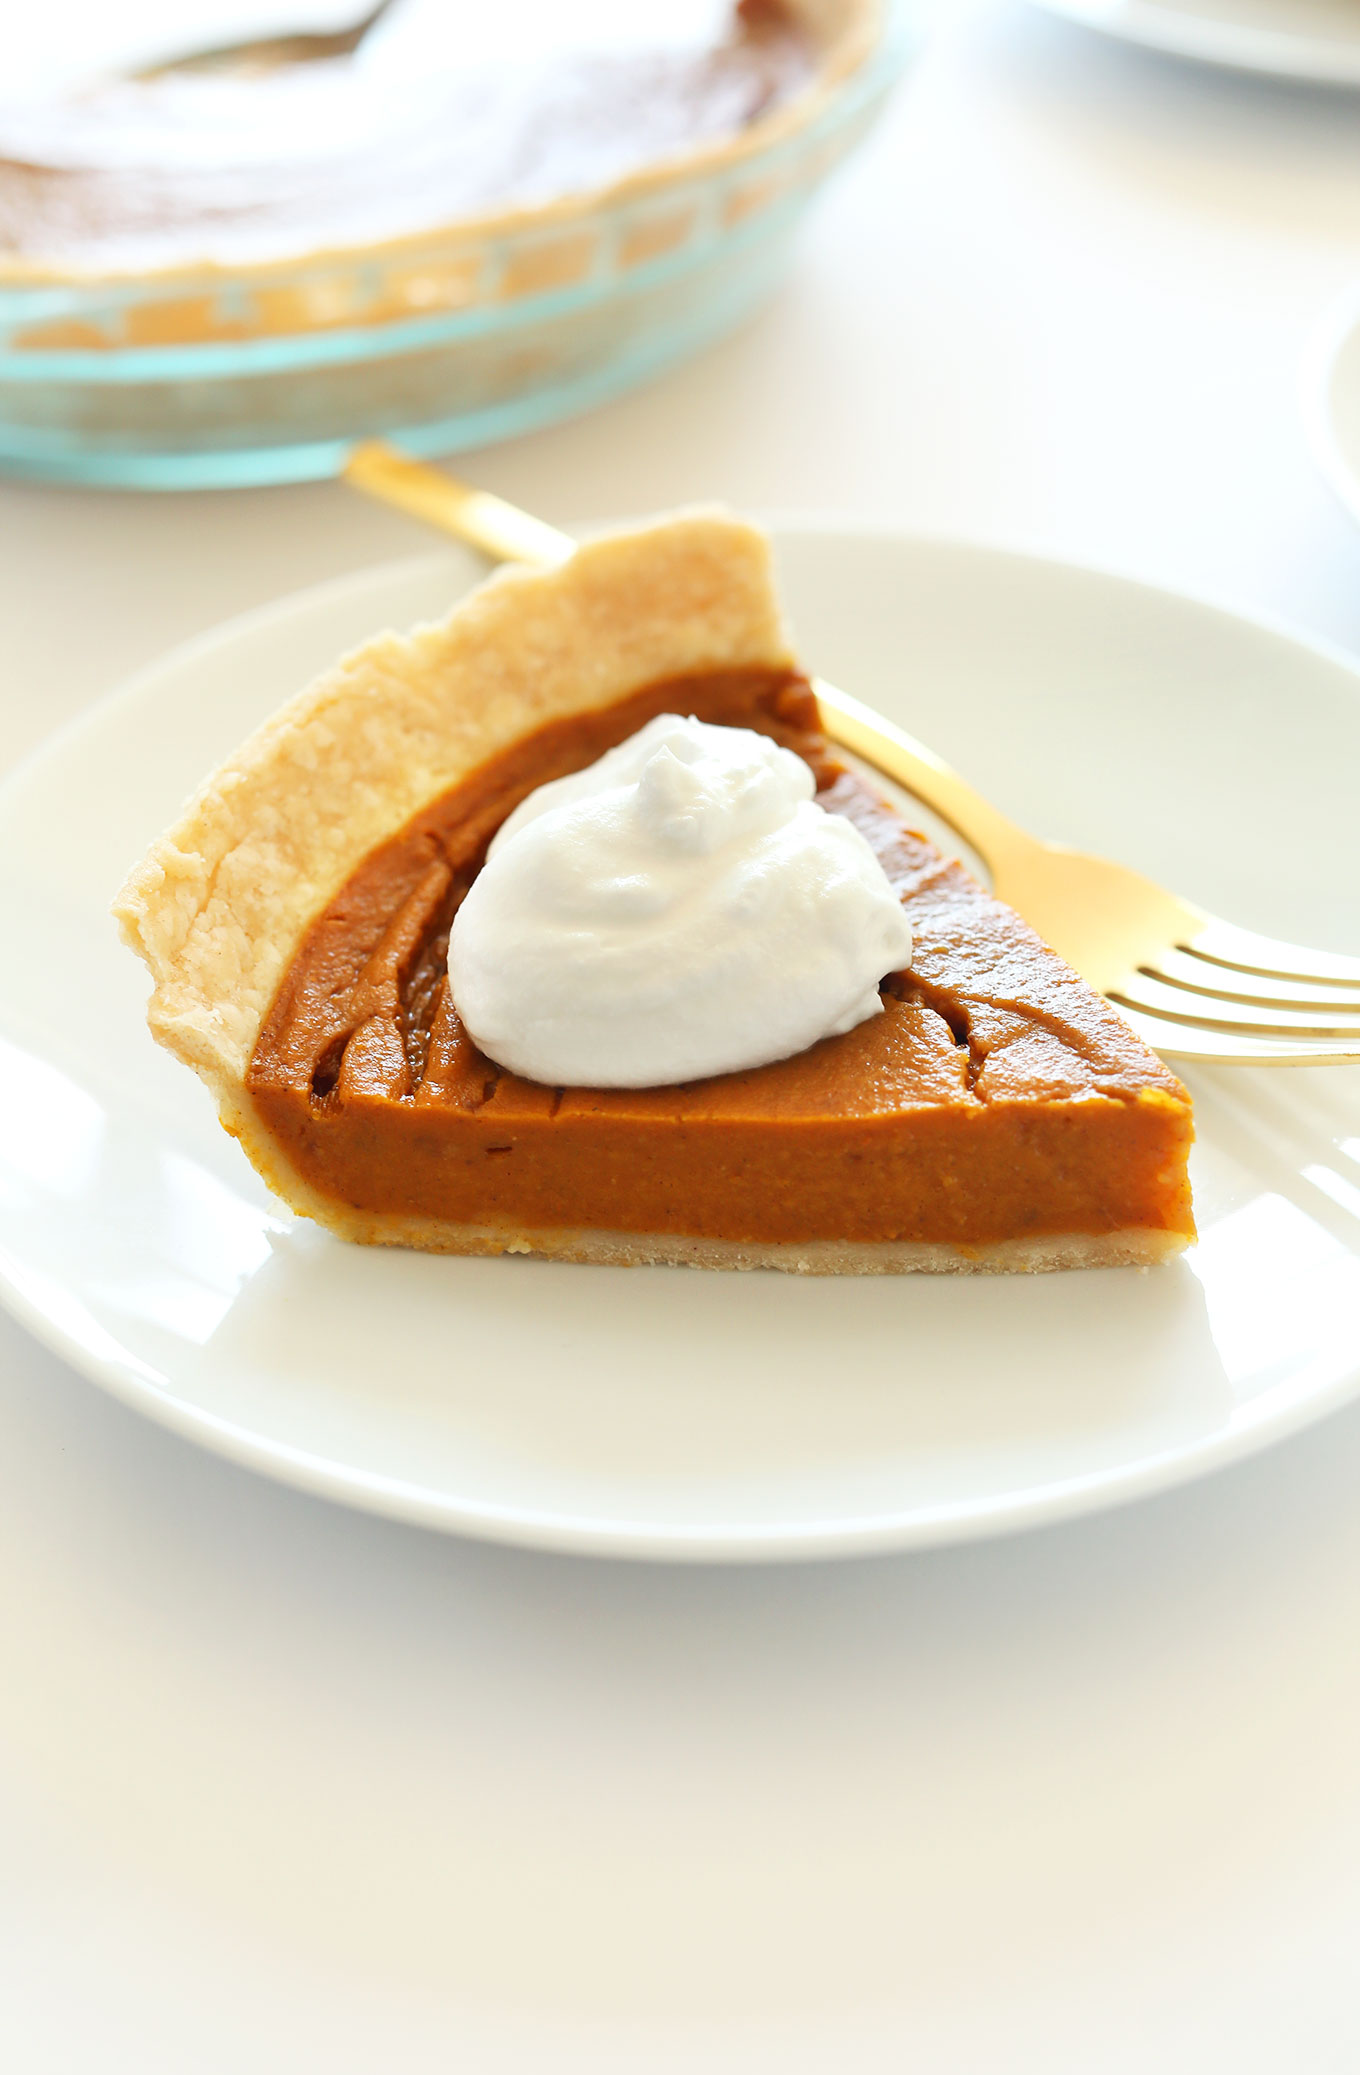 Small plate with a slice of Vegan Gluten-Free Pumpkin Pie topped with coconut whipped cream